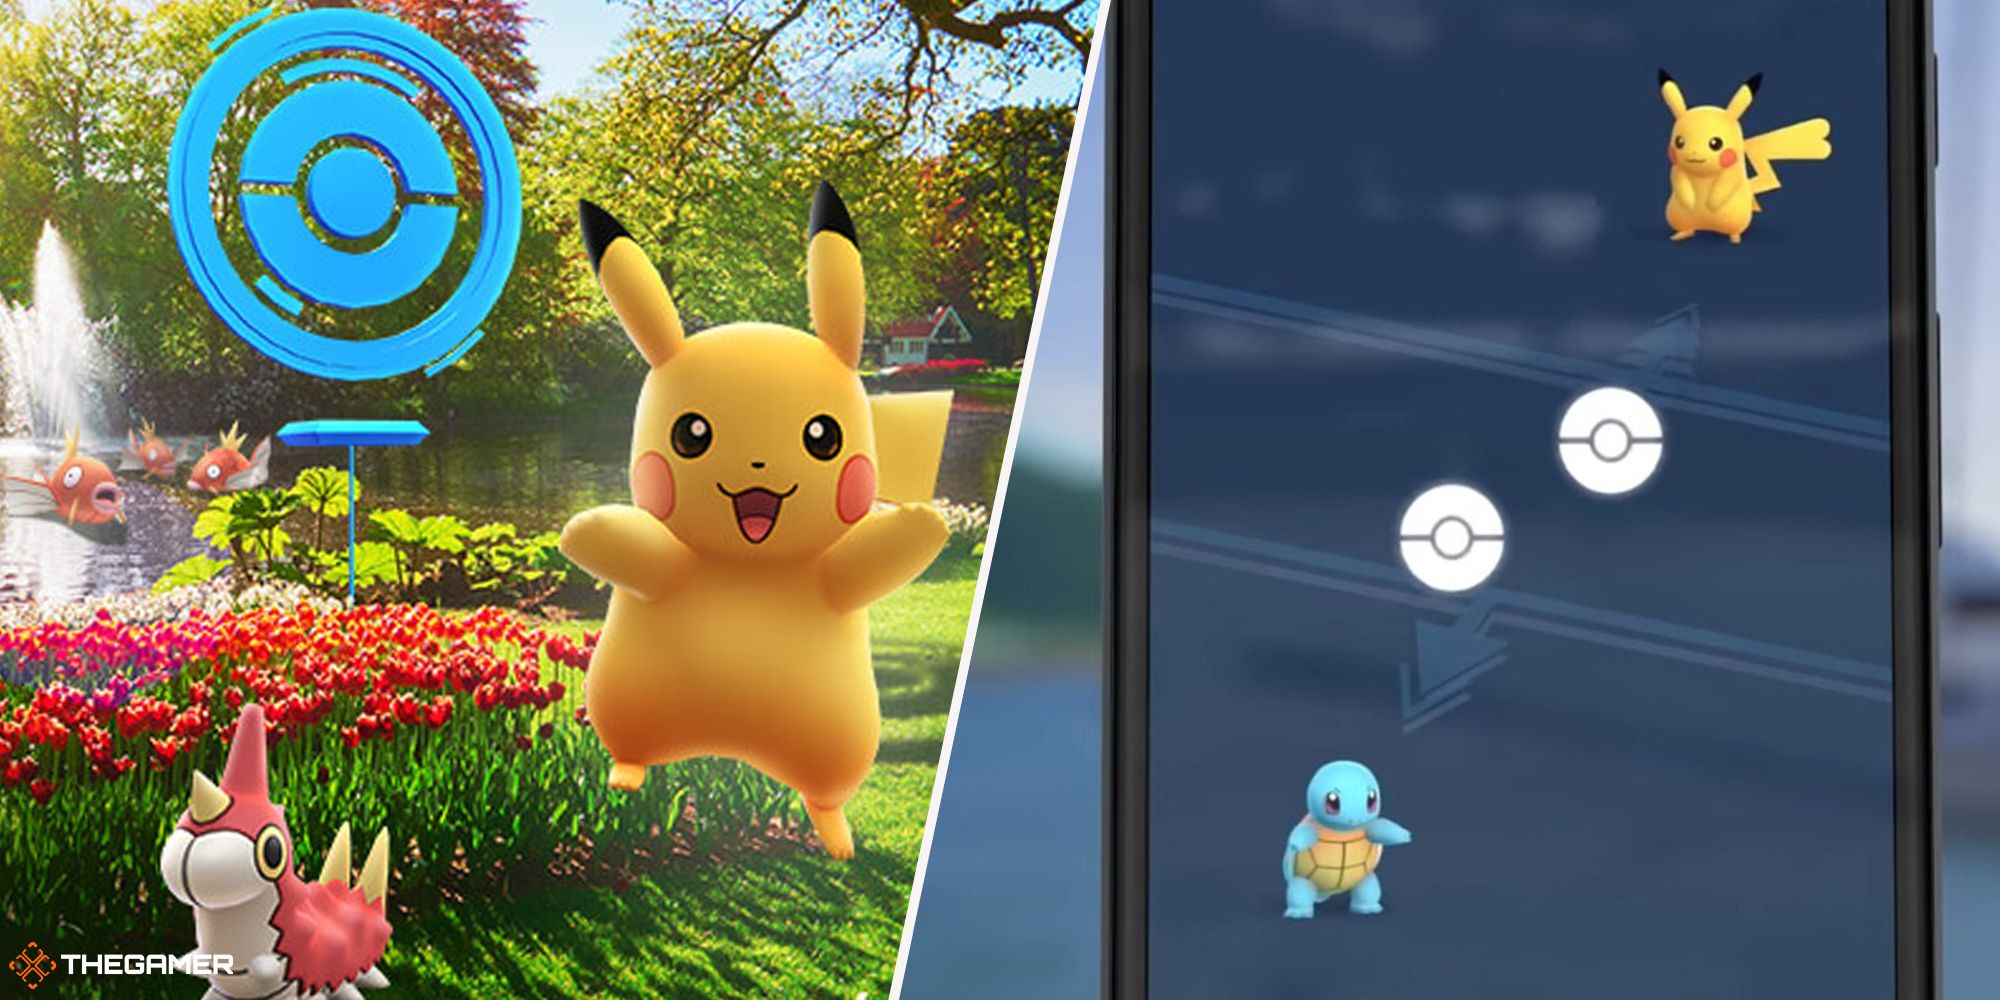 Pokemon Go - Pikachi, Wurmple and a Poke Stop on the left, the trade screen showing Pikachu and Squirtle on the right.